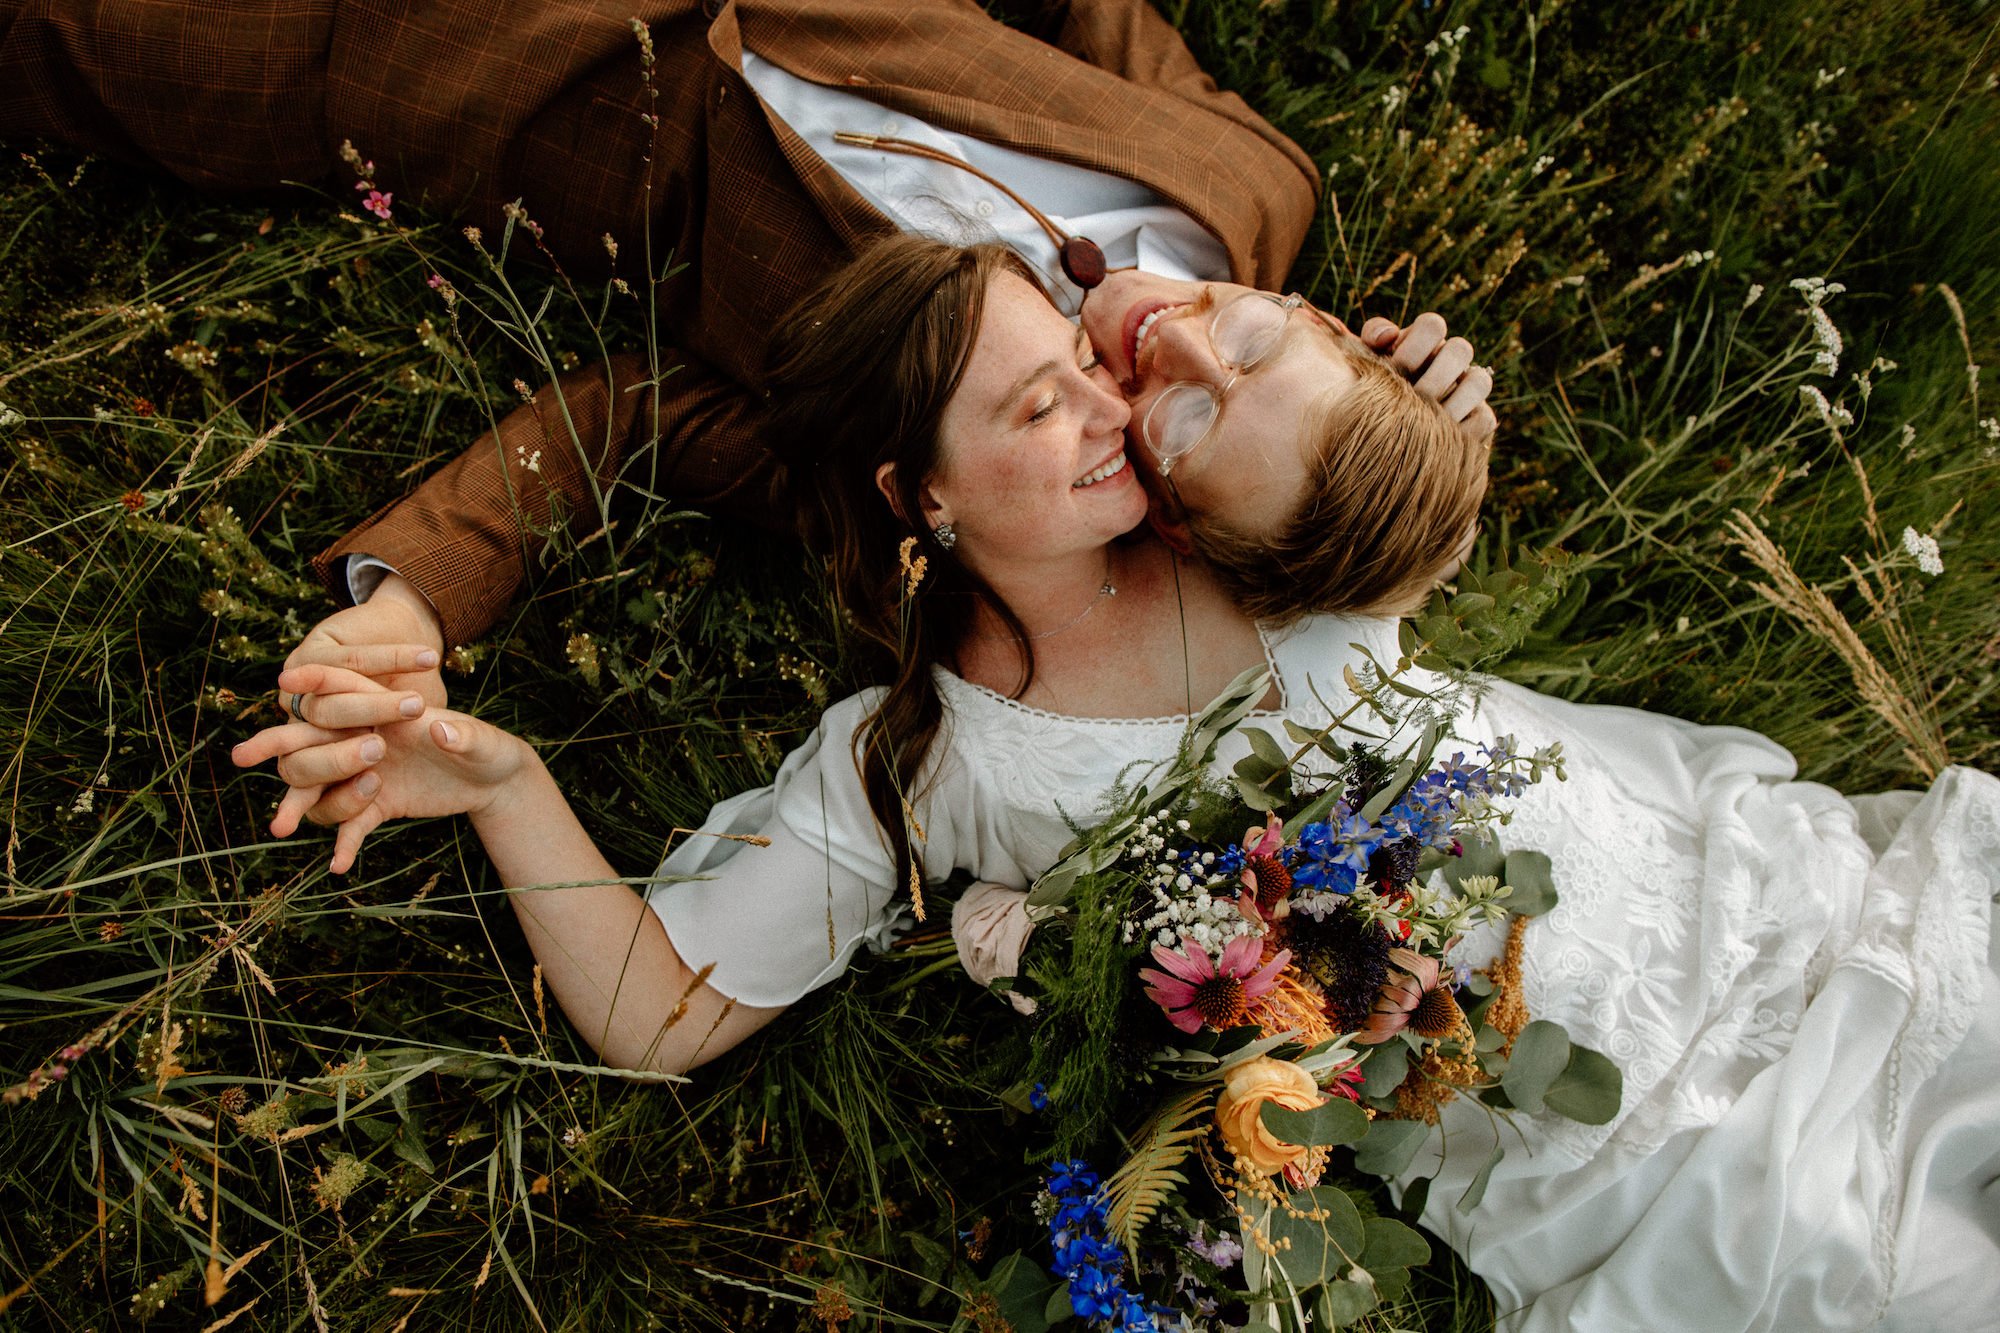 the-happy-bride-and-grrom-laying-in-grass-and-wildflowers-boho-wedding-inspiration